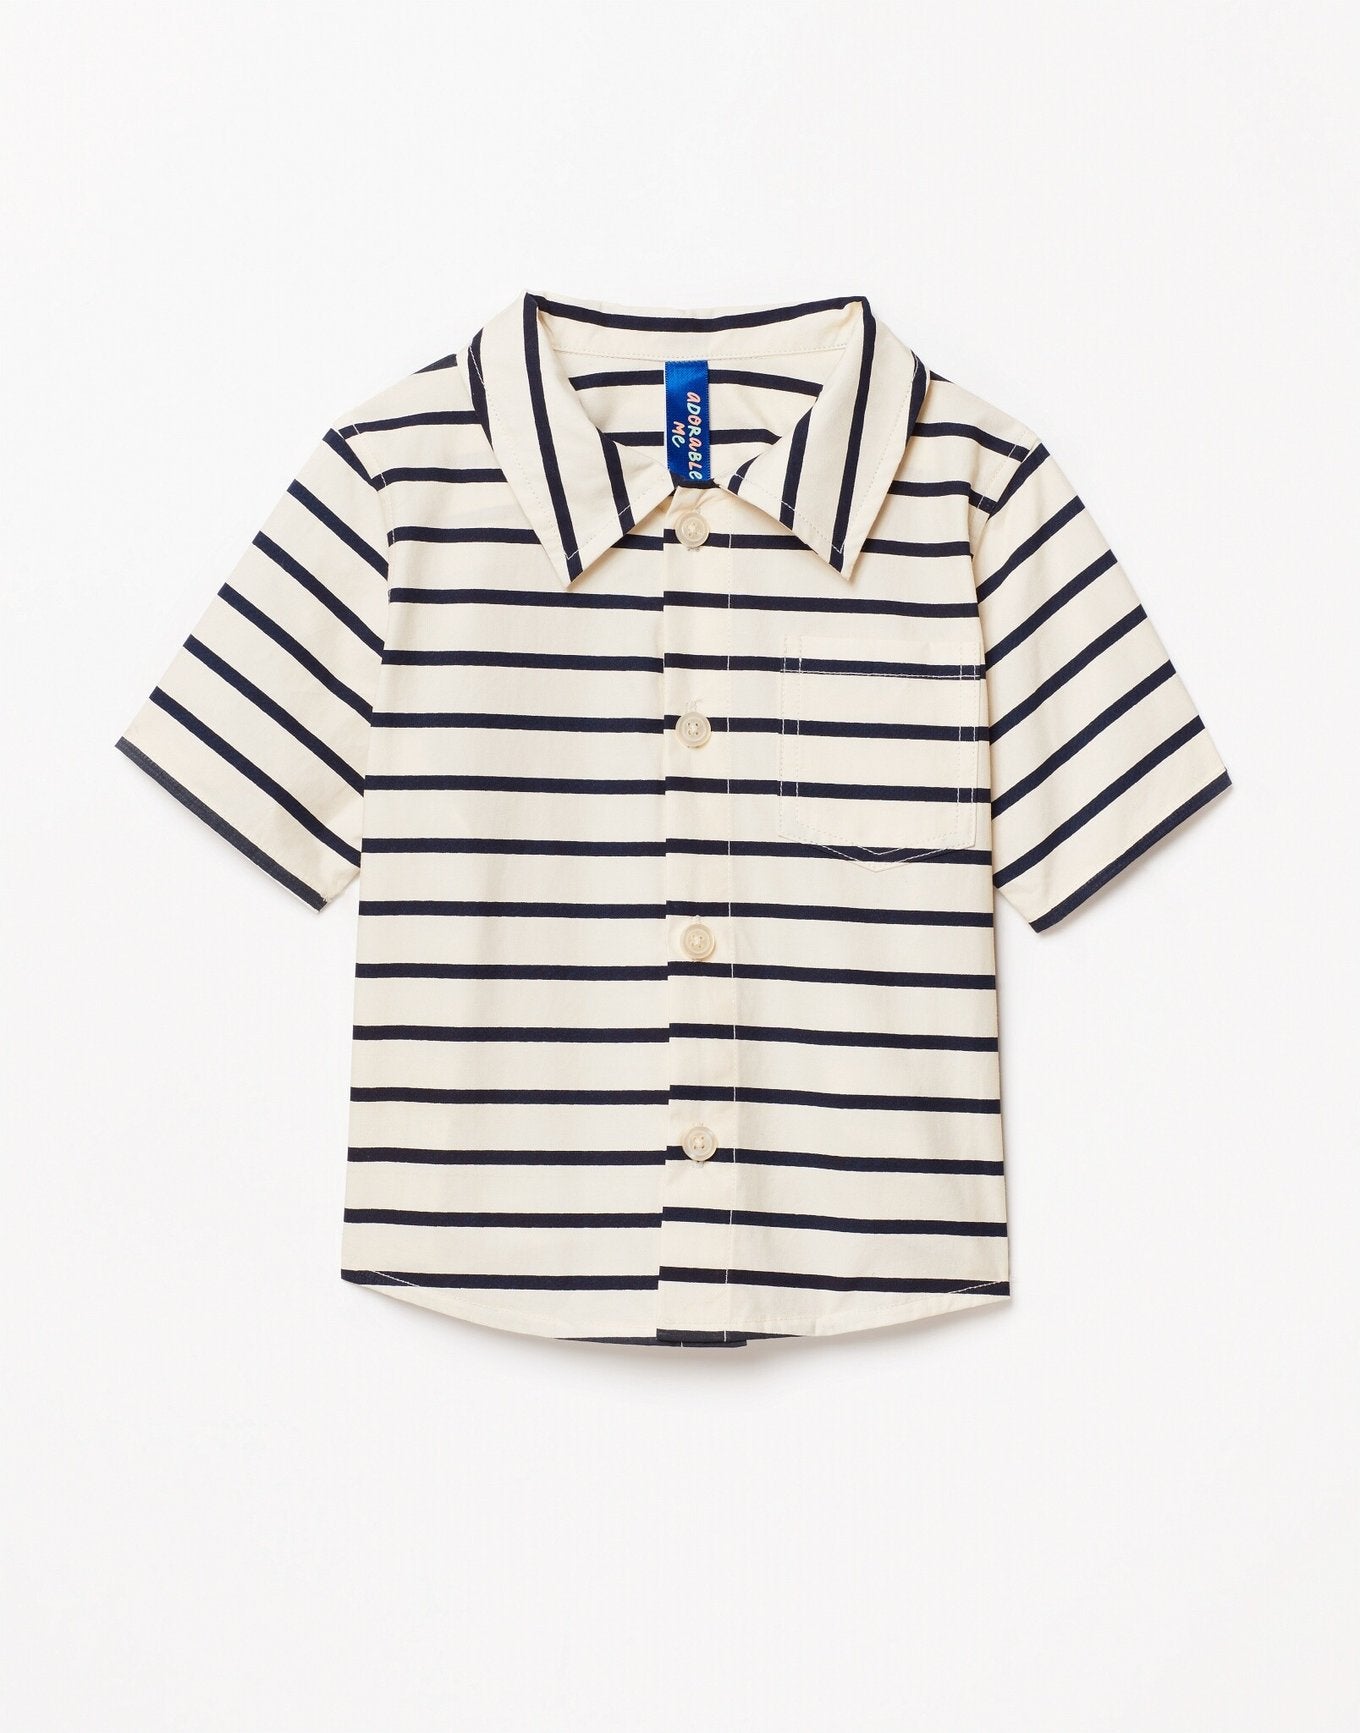 Outlines Kids Wyatt in color Pin and shape shirt